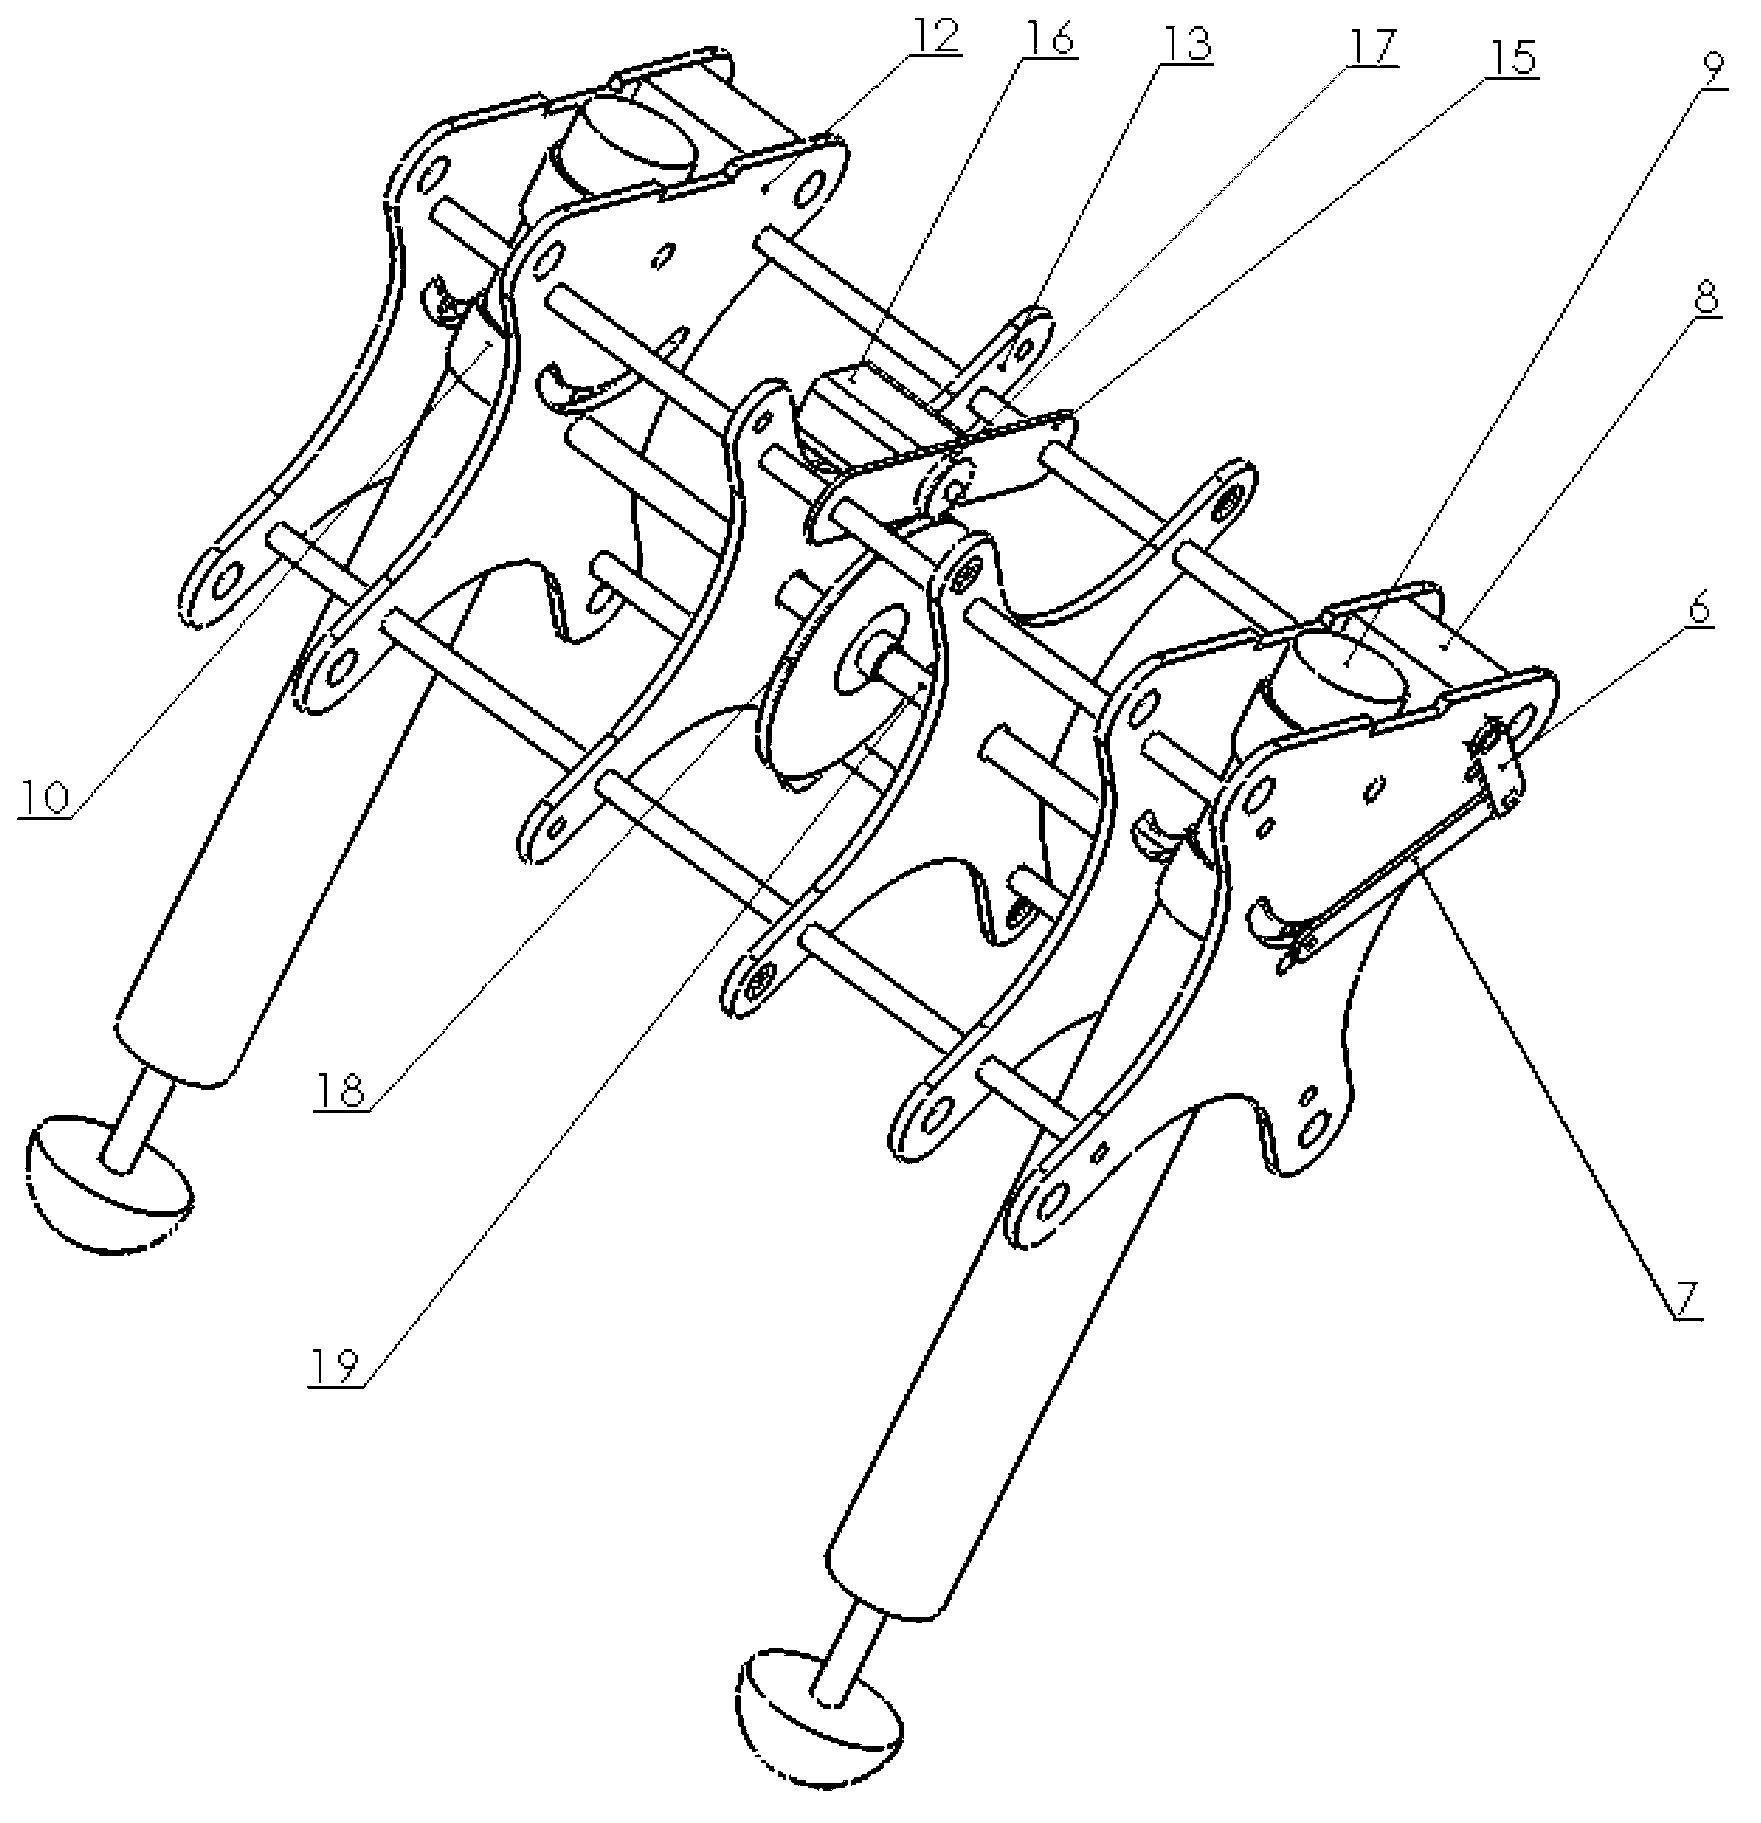 Jumping mechanism with adjustable jump-up angle for wheeled hopping robot